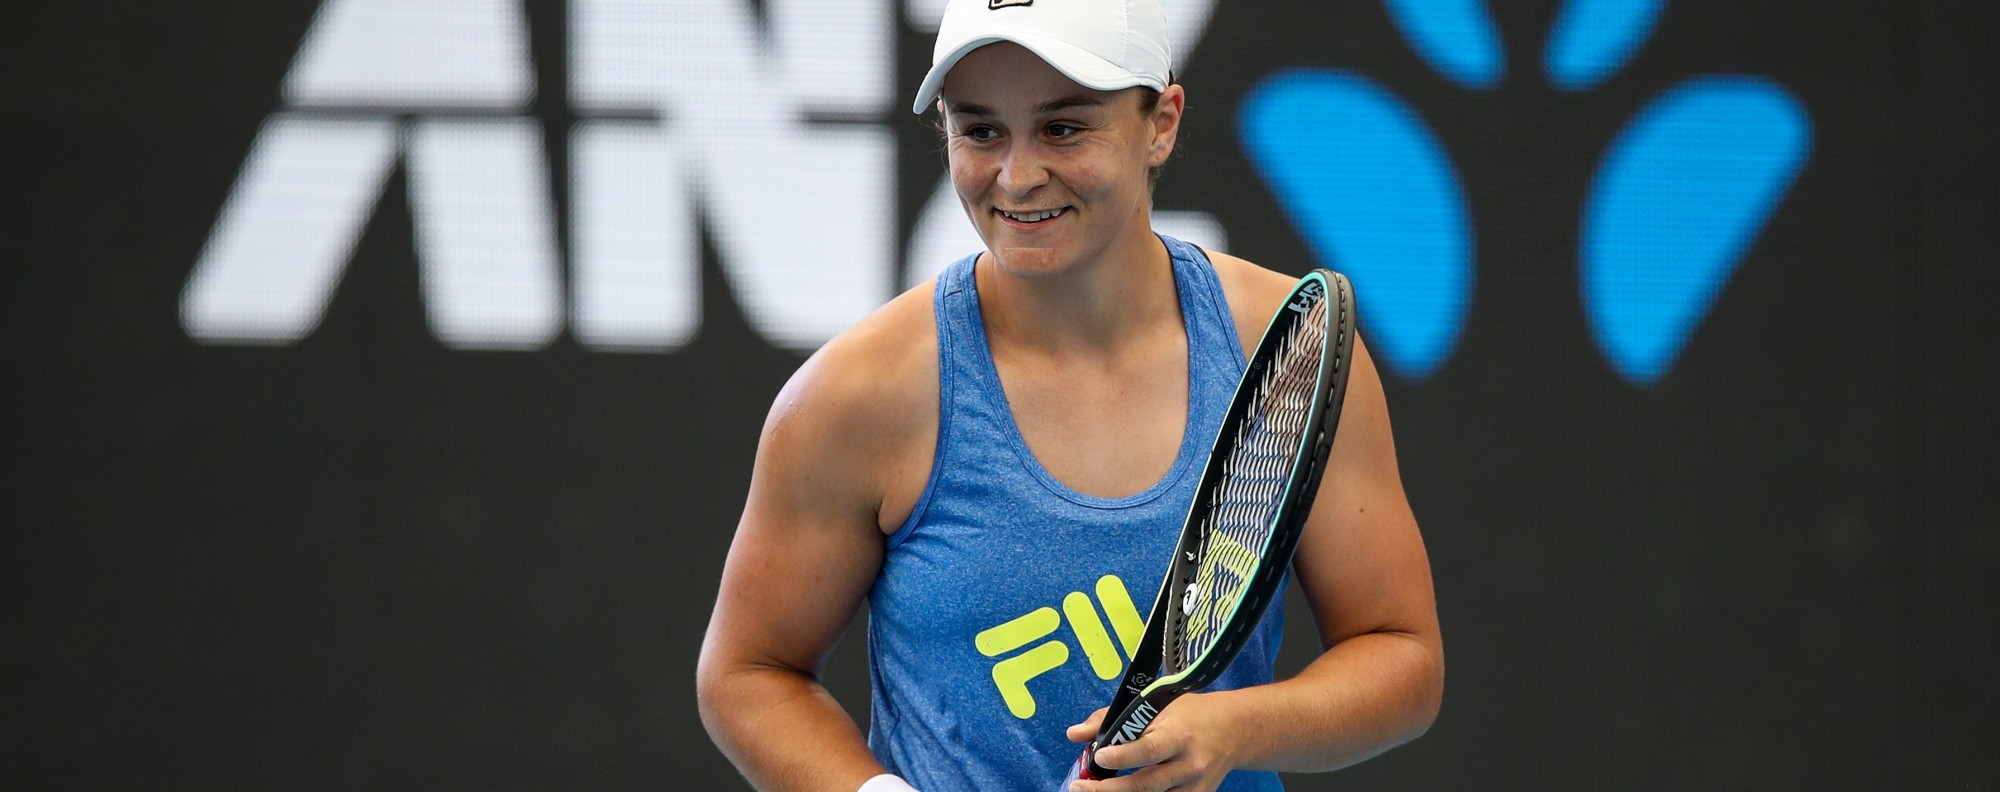 Grund tjære Knogle Australian tennis star Ash Barty wary of Emma Raducanu threat, and says  patience needed on return from four-month hiatus | South China Morning Post